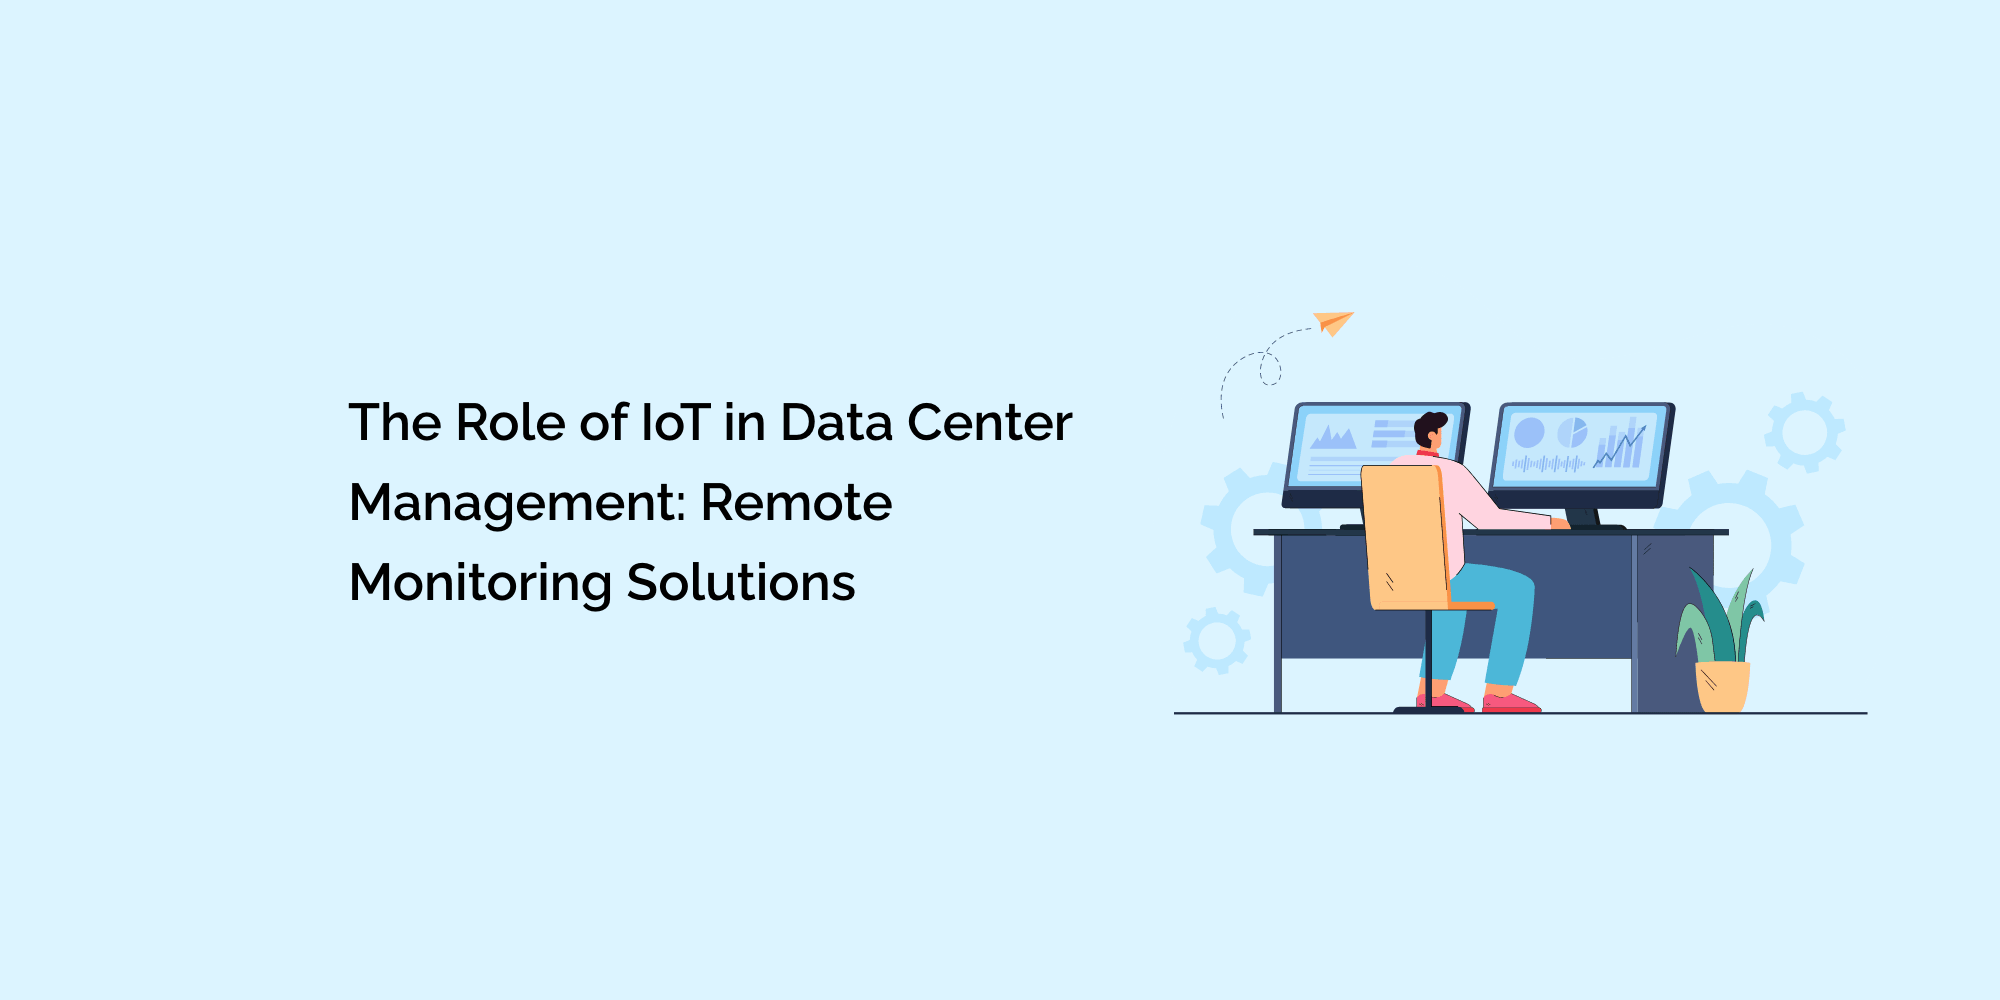 The Role of IoT in Data Center Management: Remote Monitoring Solutions